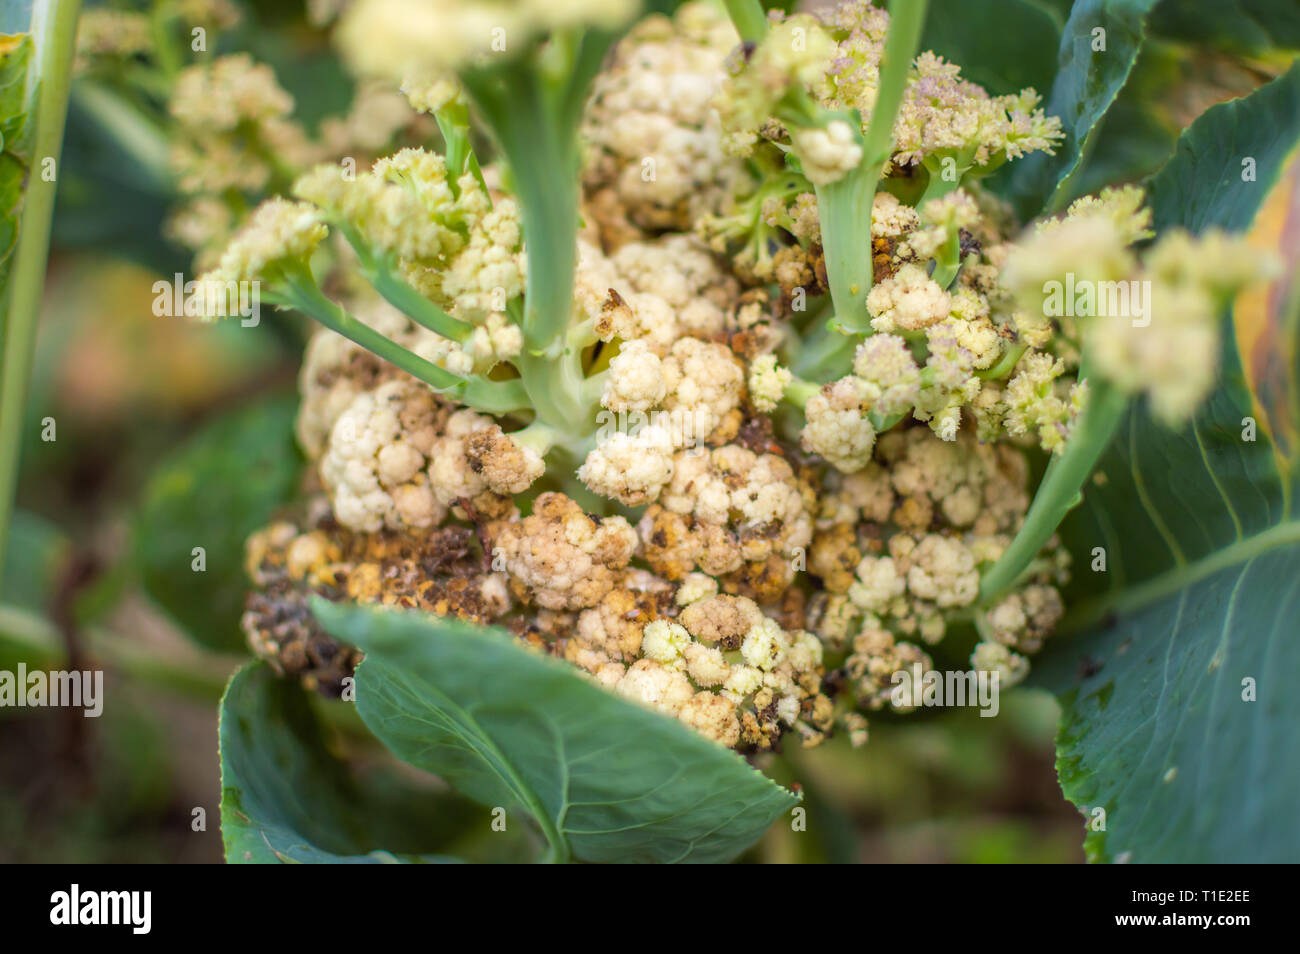 Decaying cauliflower caused due to fungal attack of Sclerotinia sclerotiorum Stock Photo